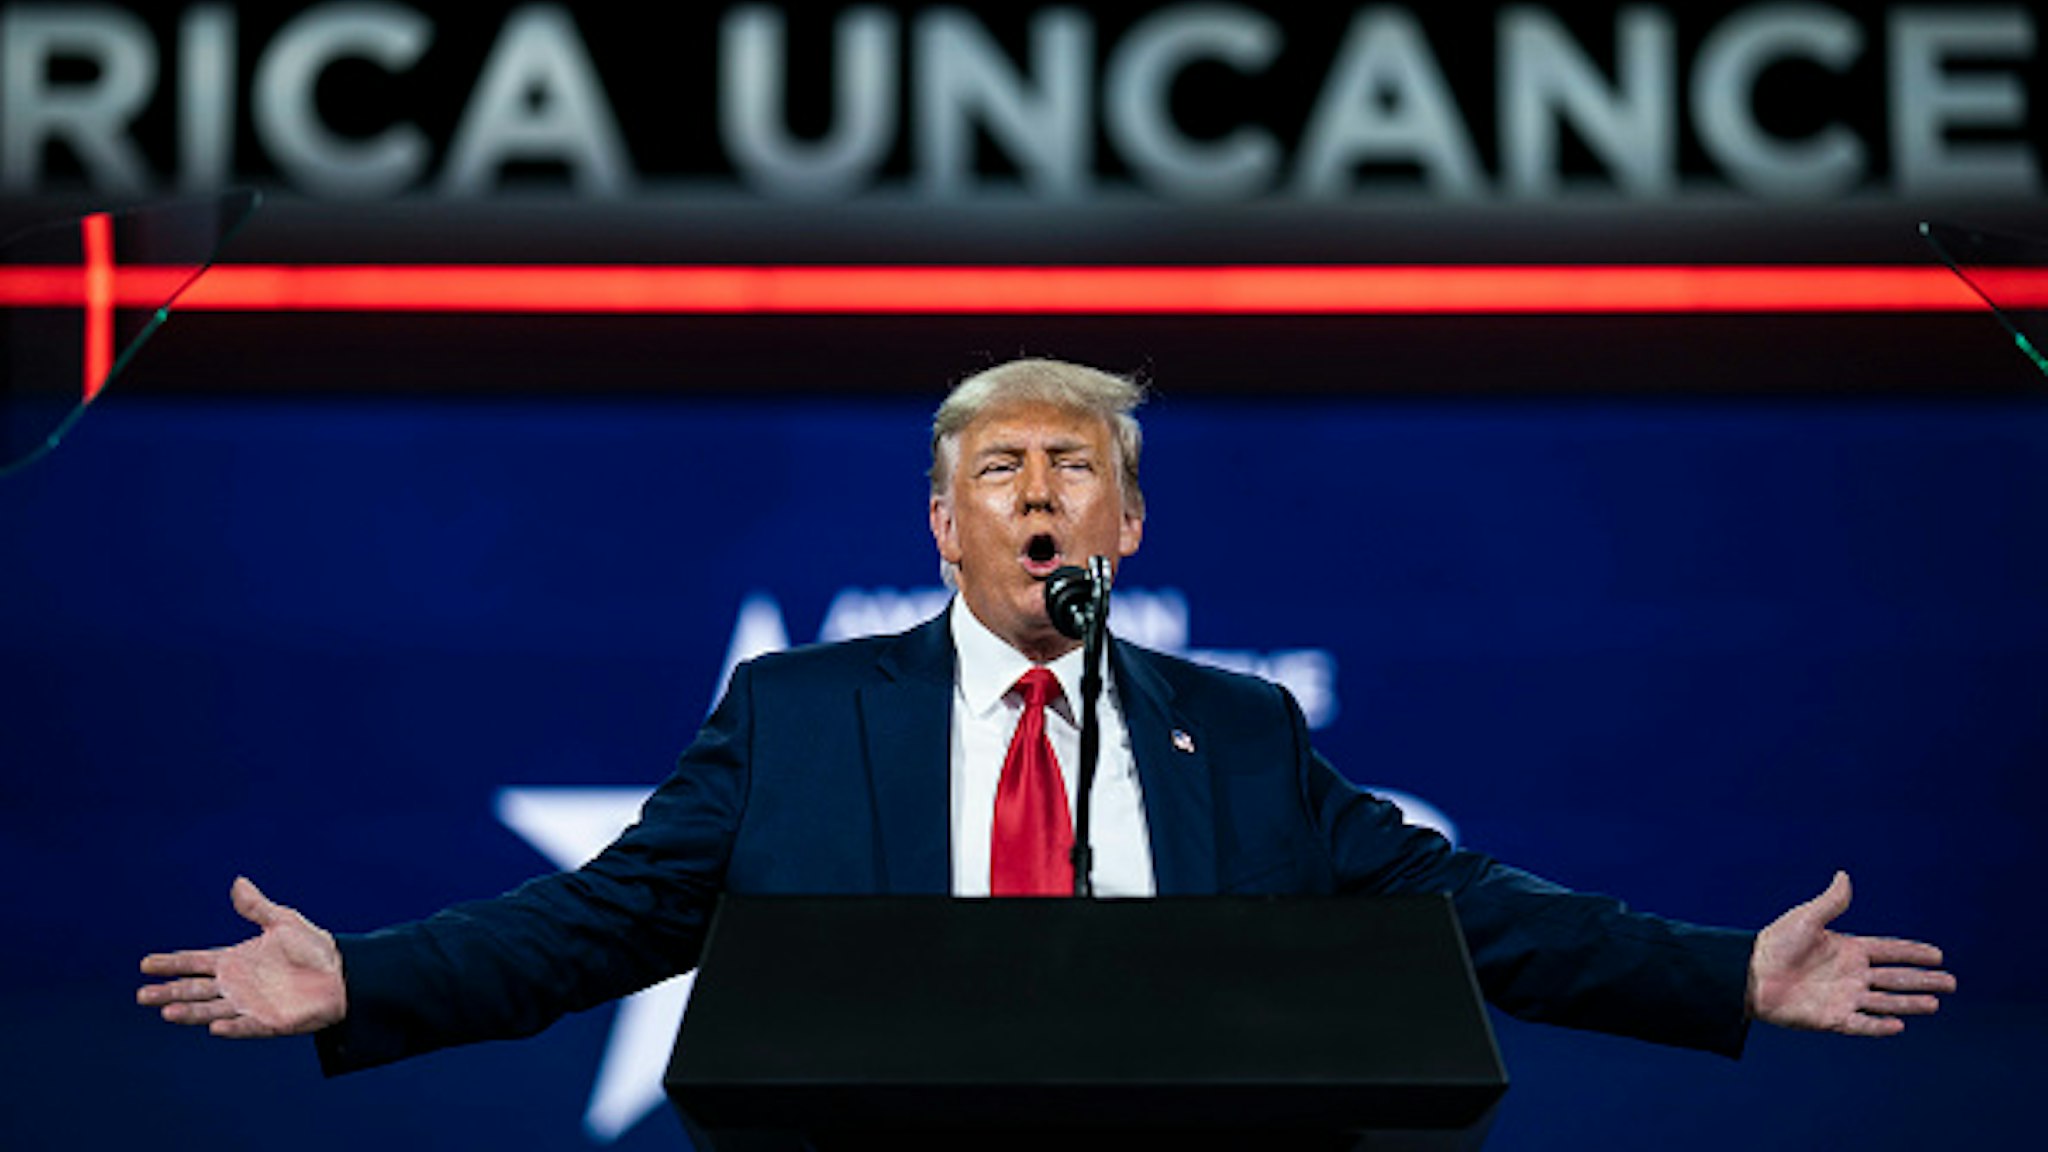 ORLANDO, FL - FEBRUARY 28: Former President Donald J Trump speaks during the final day of the Conservative Political Action Conference CPAC held at the Hyatt Regency Orlando on Sunday, Feb 28, 2021 in Orlando, FL.